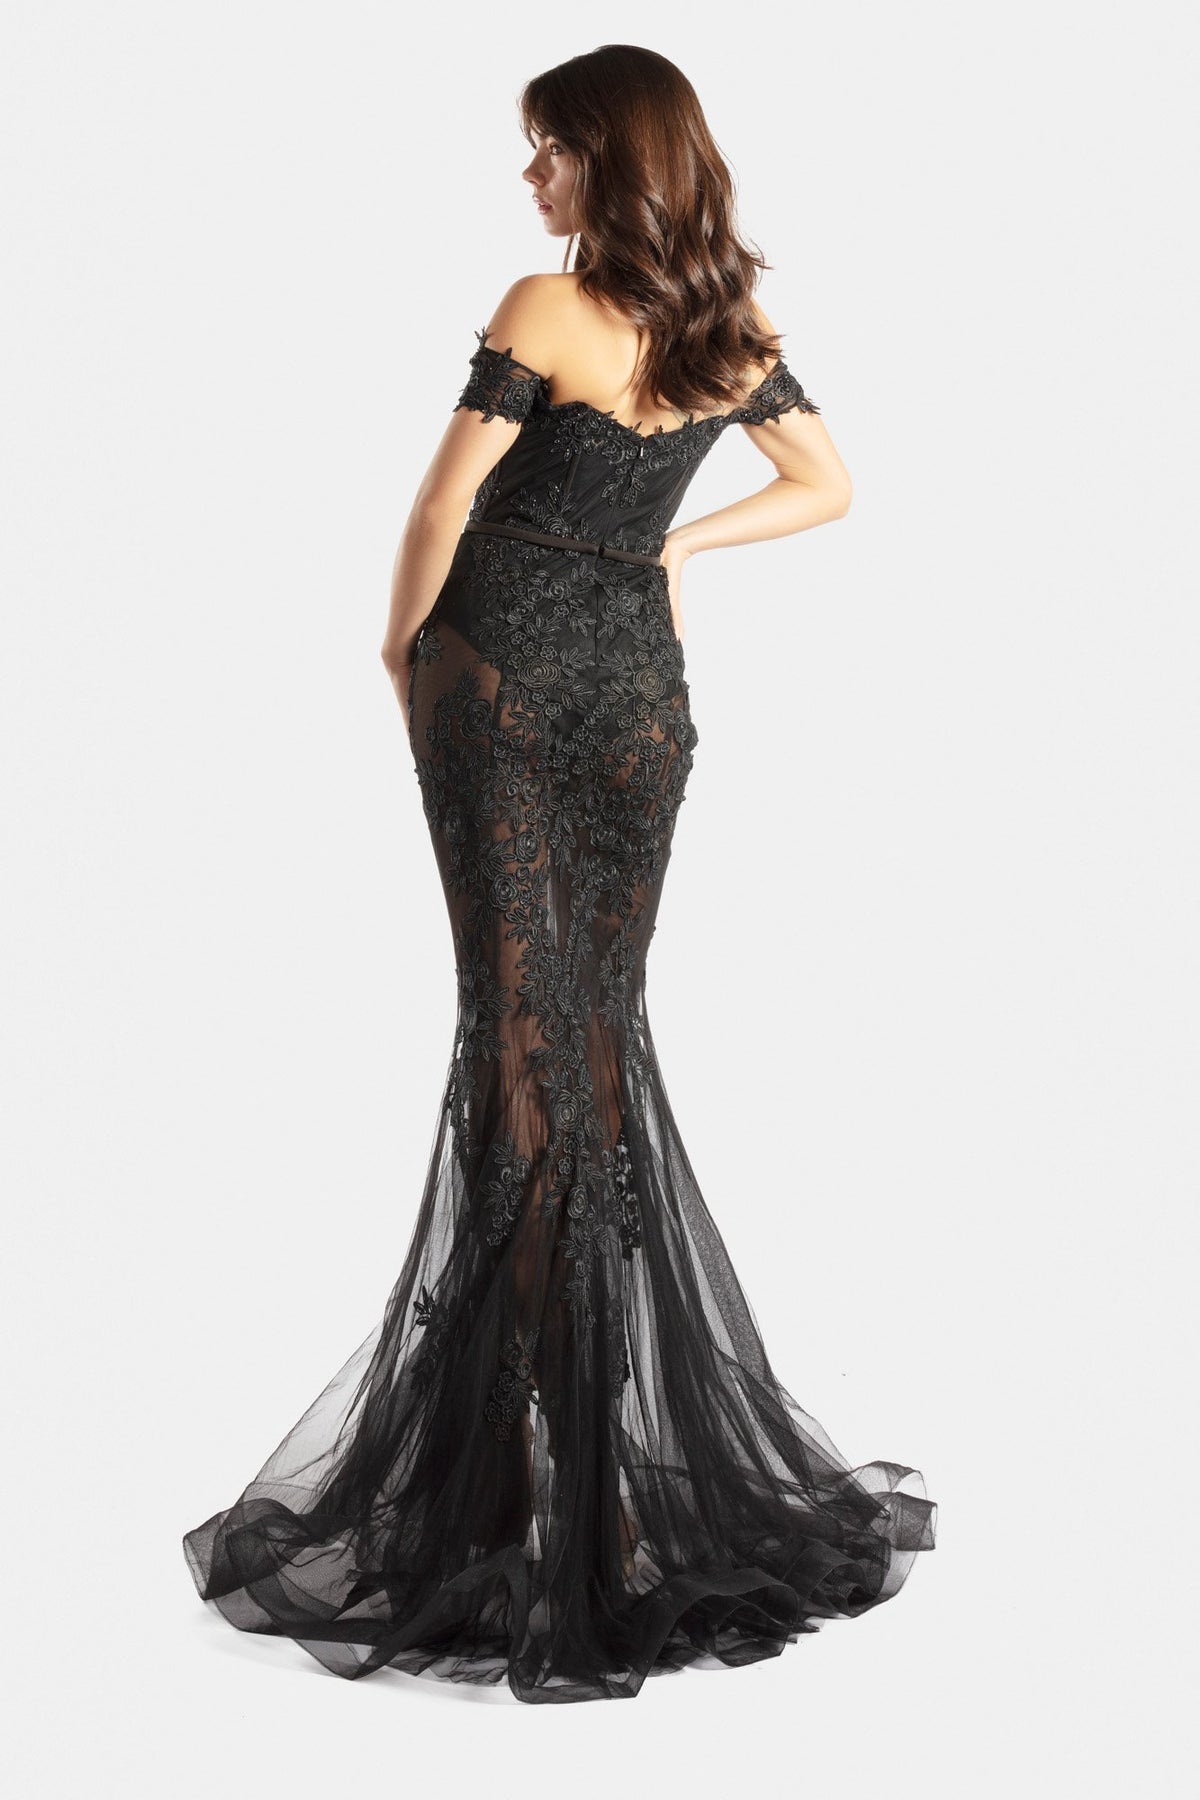 Terani - 2012P1471 - Sheer Mermaid Prom Gown Appliqued With Sultry Lace